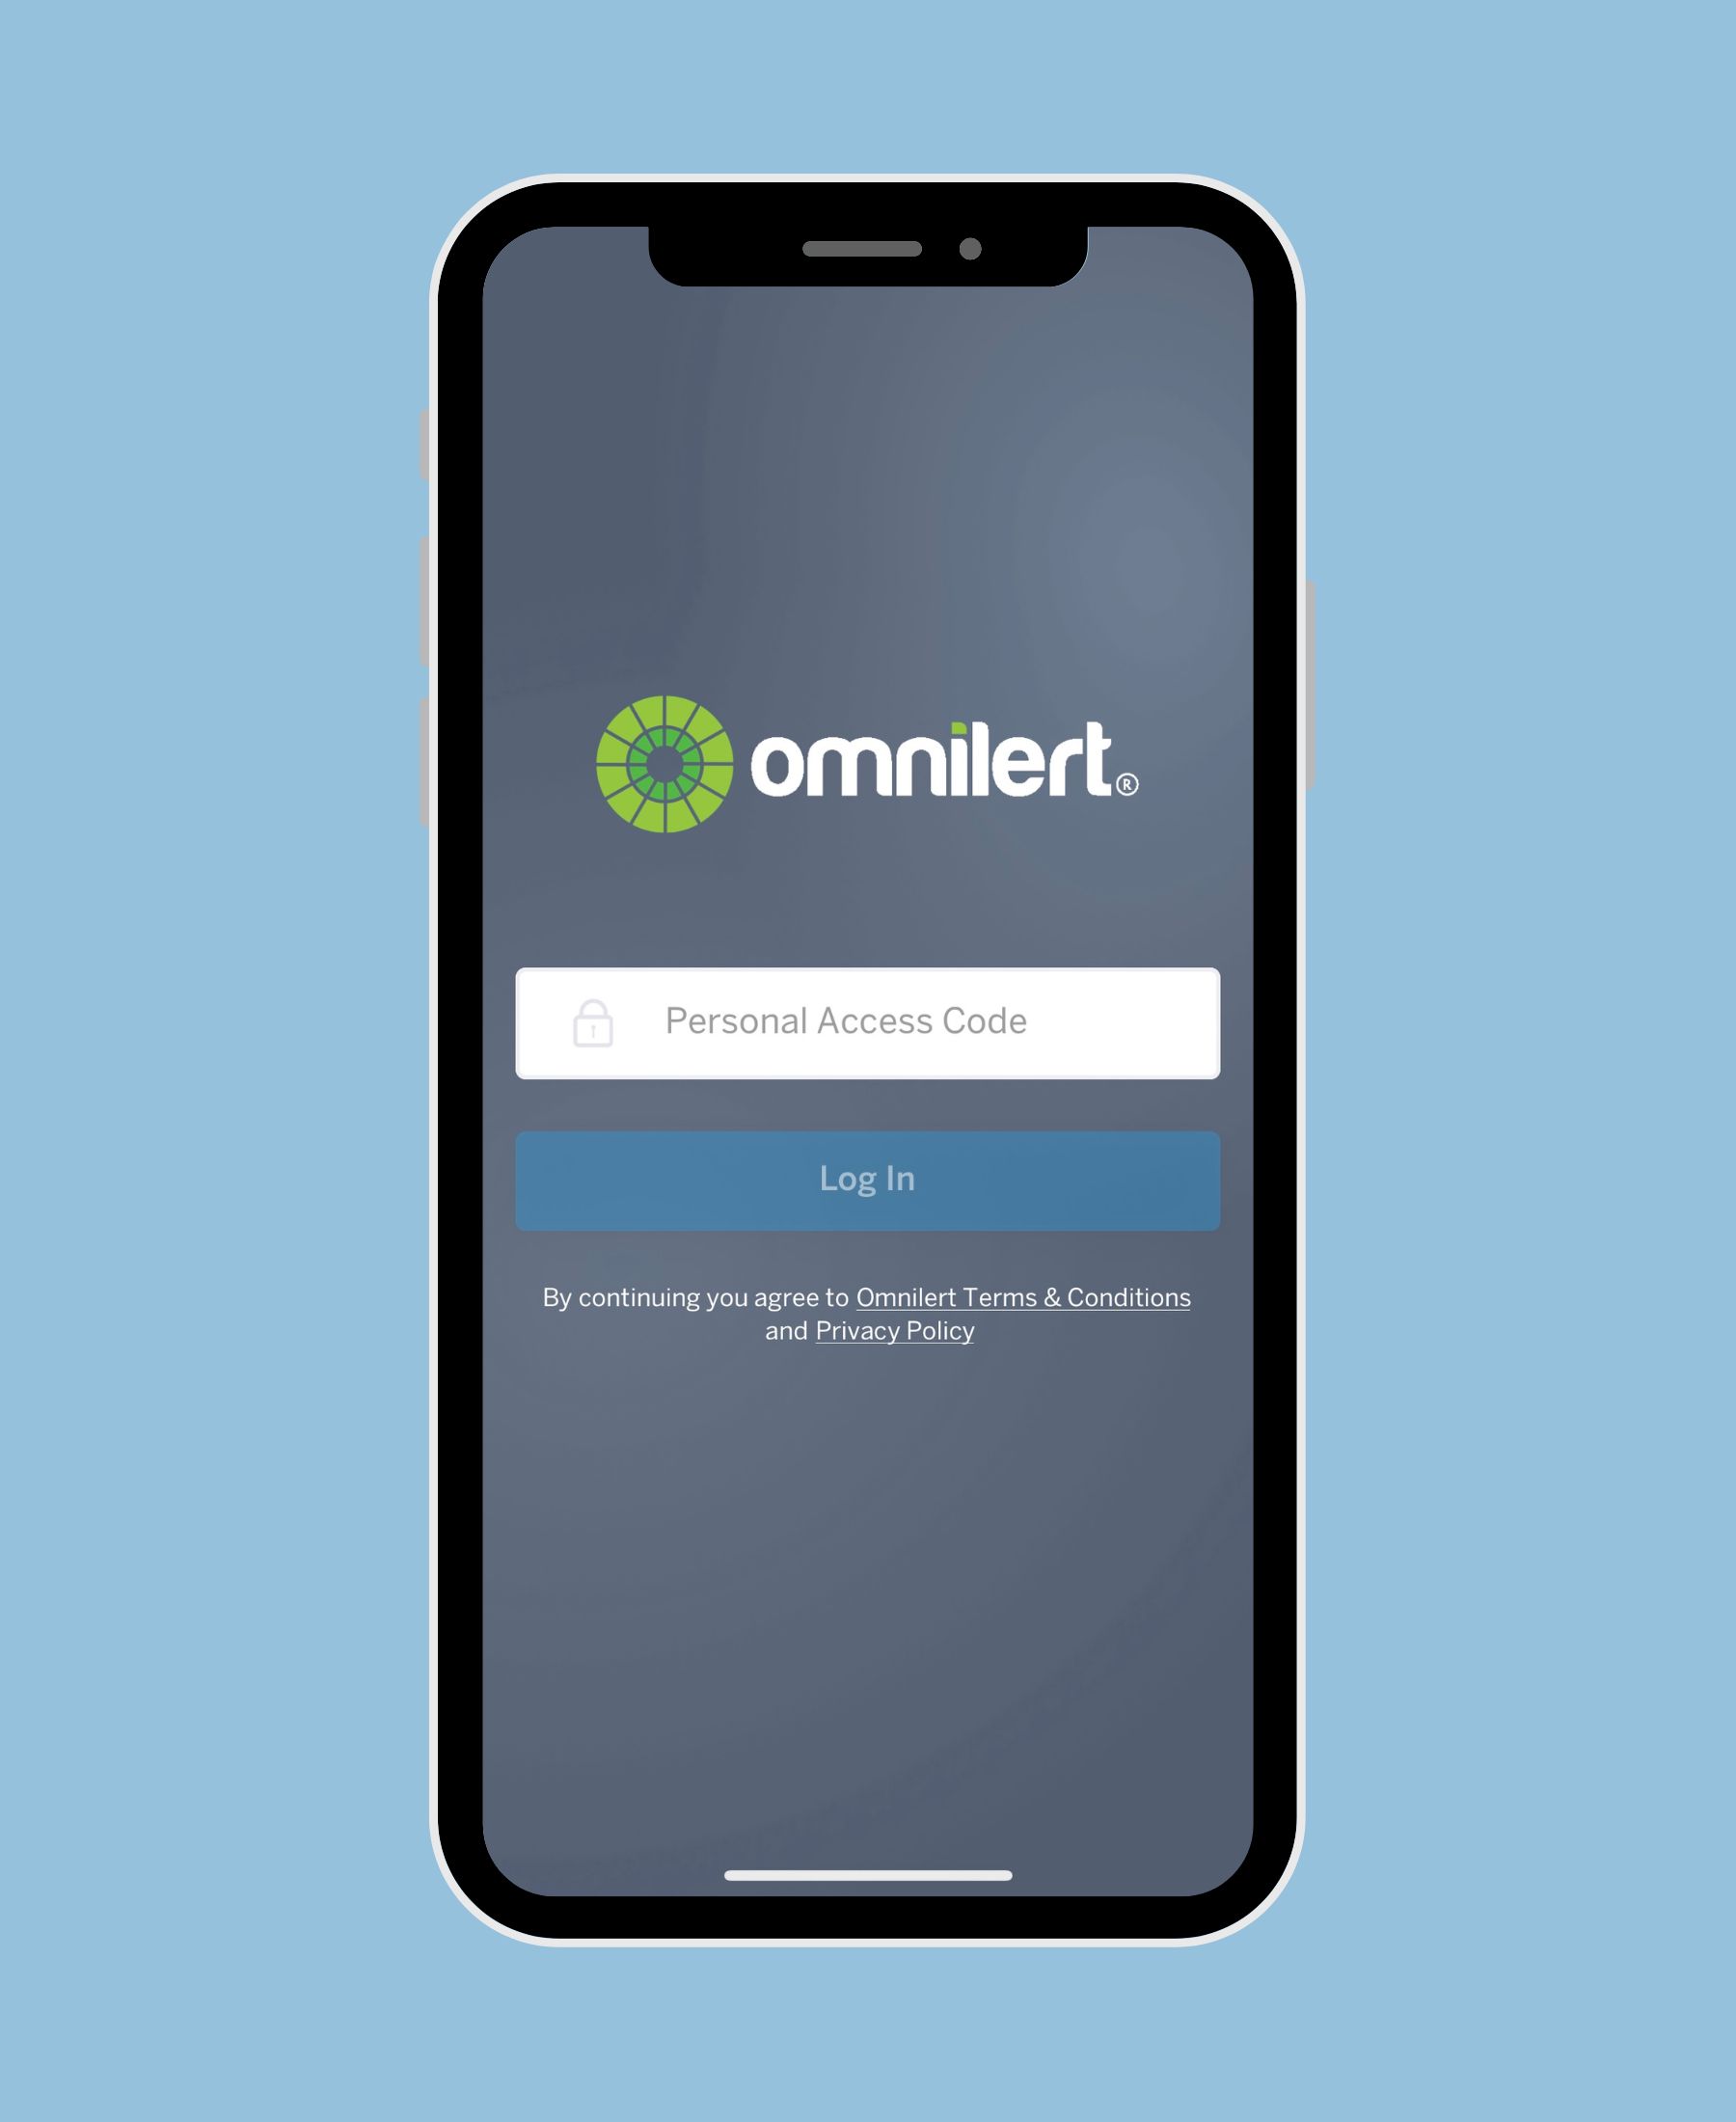 Phone screen showing Omnilert app sign in page